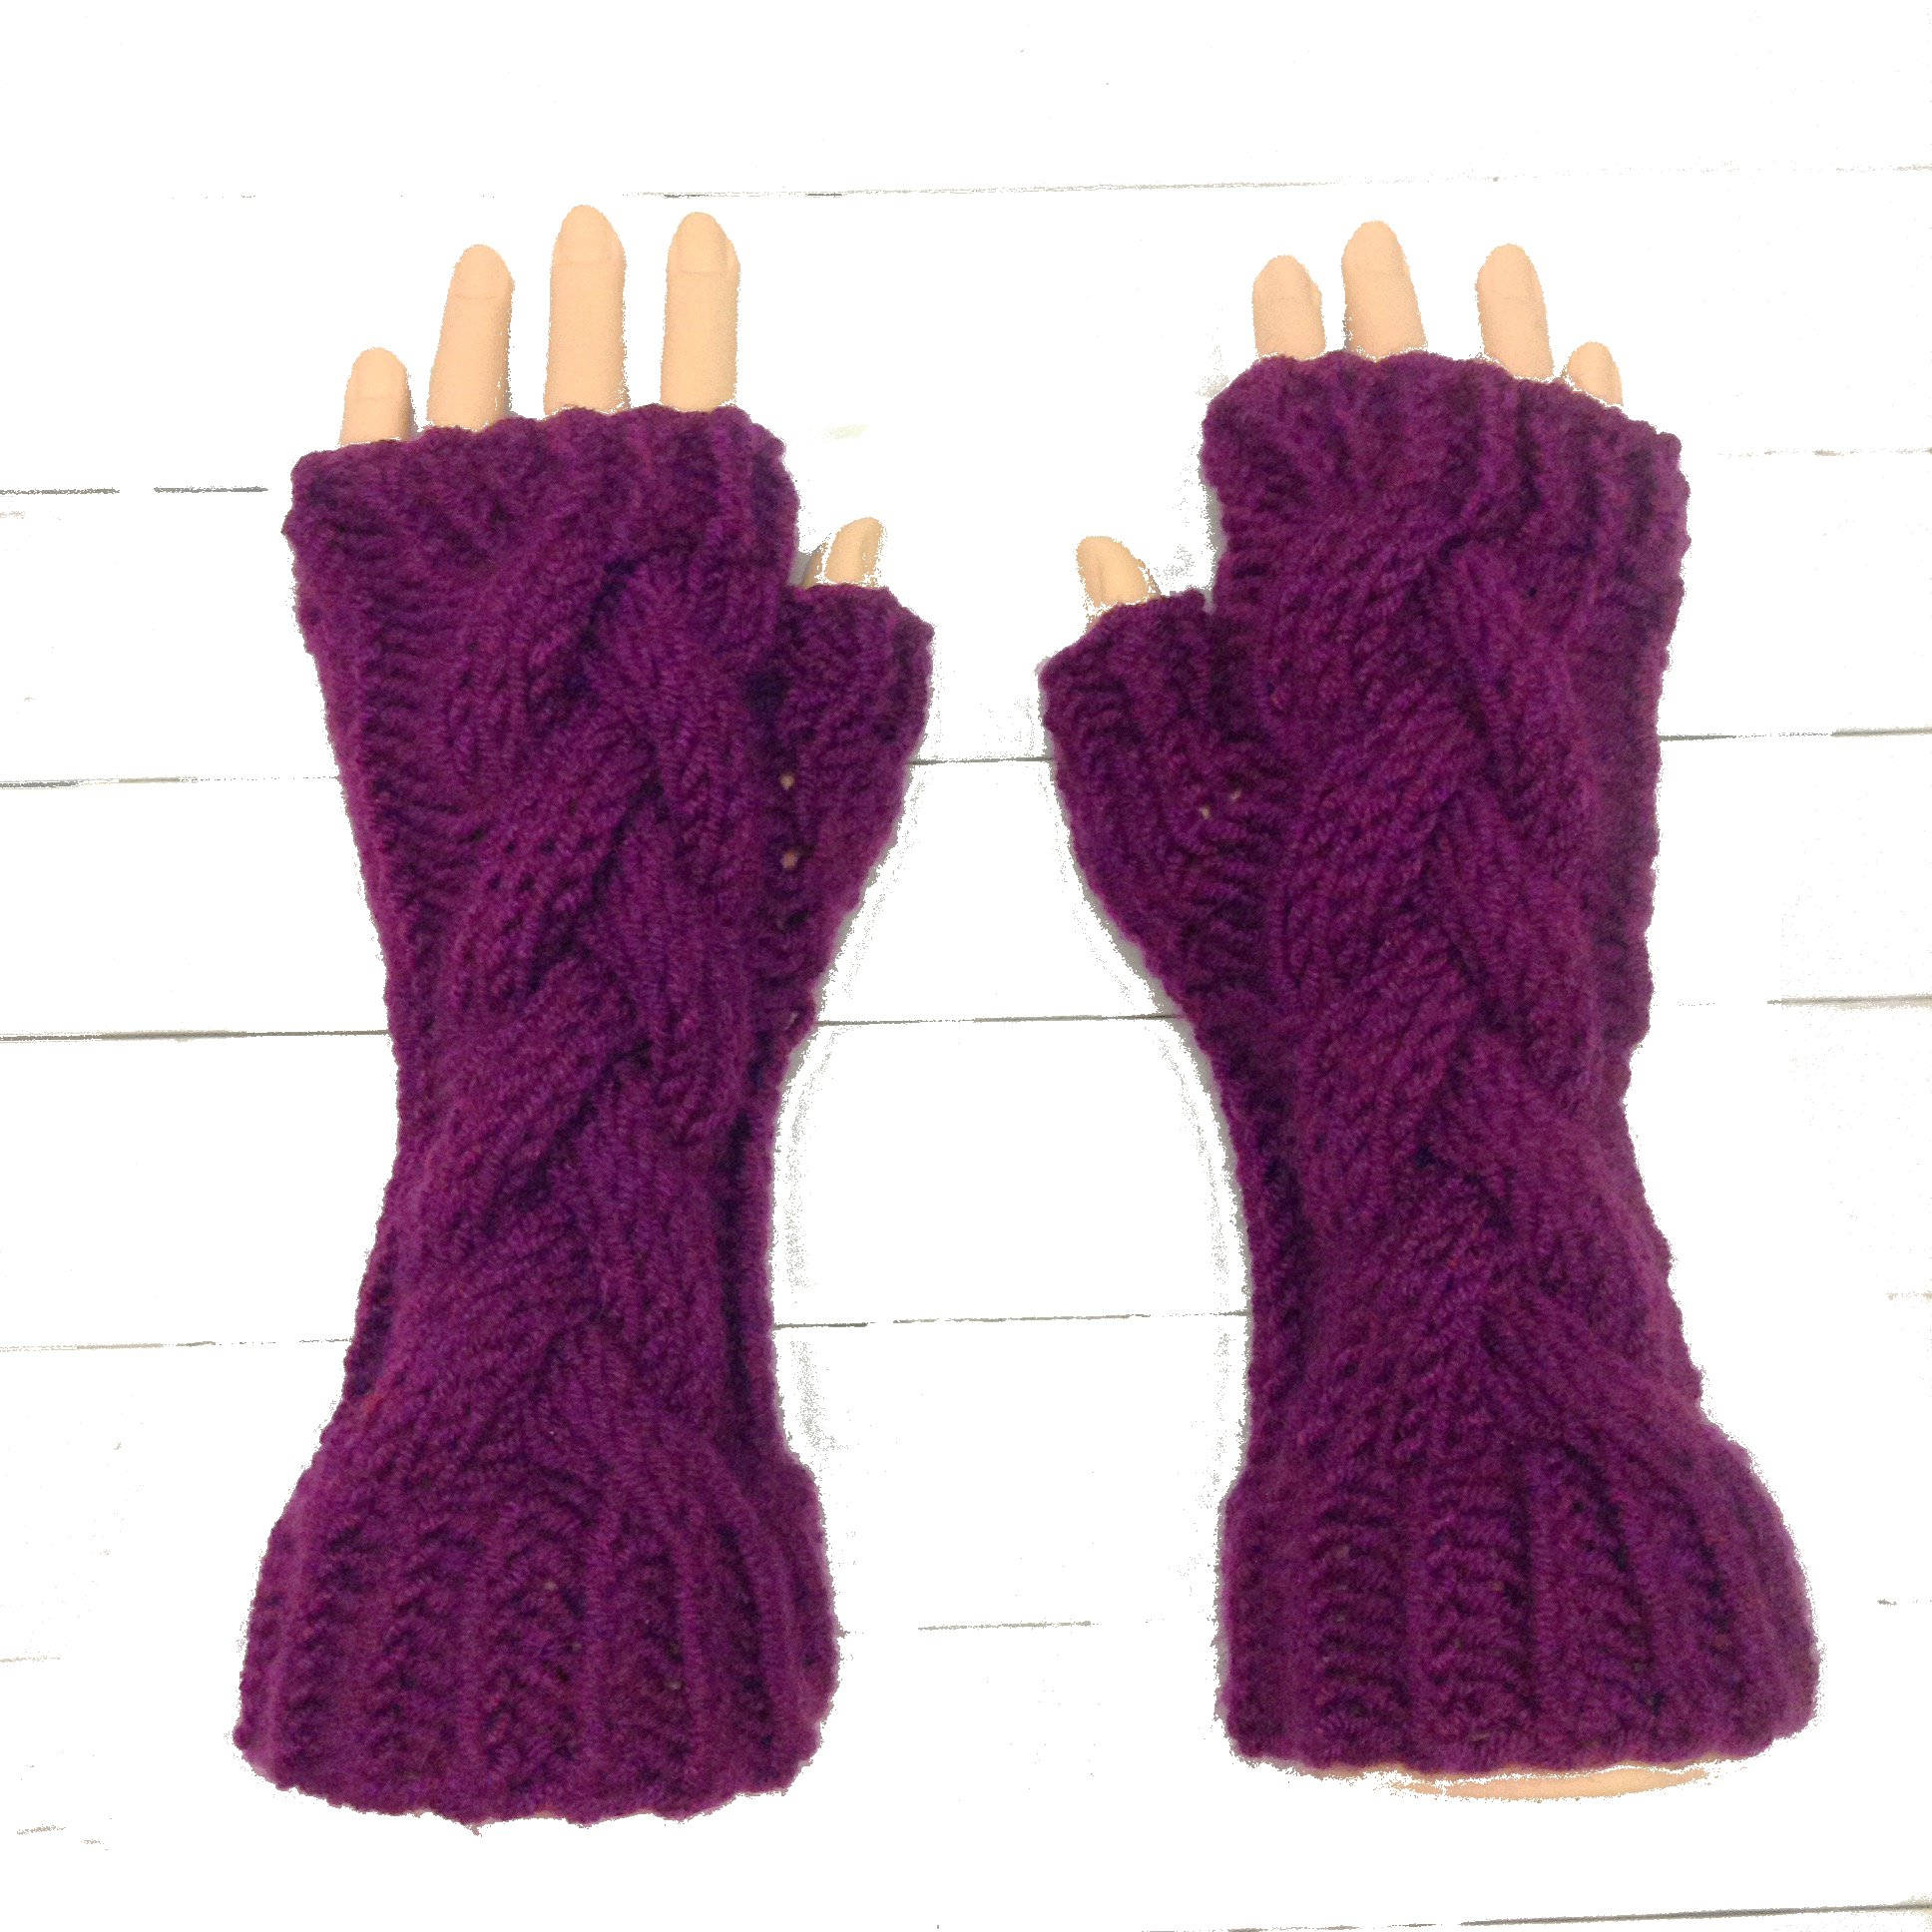 Knitting Pattern For Gloves Branch Cable Fingerless Gloves Knitting Pattern Womens Cable Gloves Pattern Fingerless Gloves Pattern Bulky Yarn Pattern